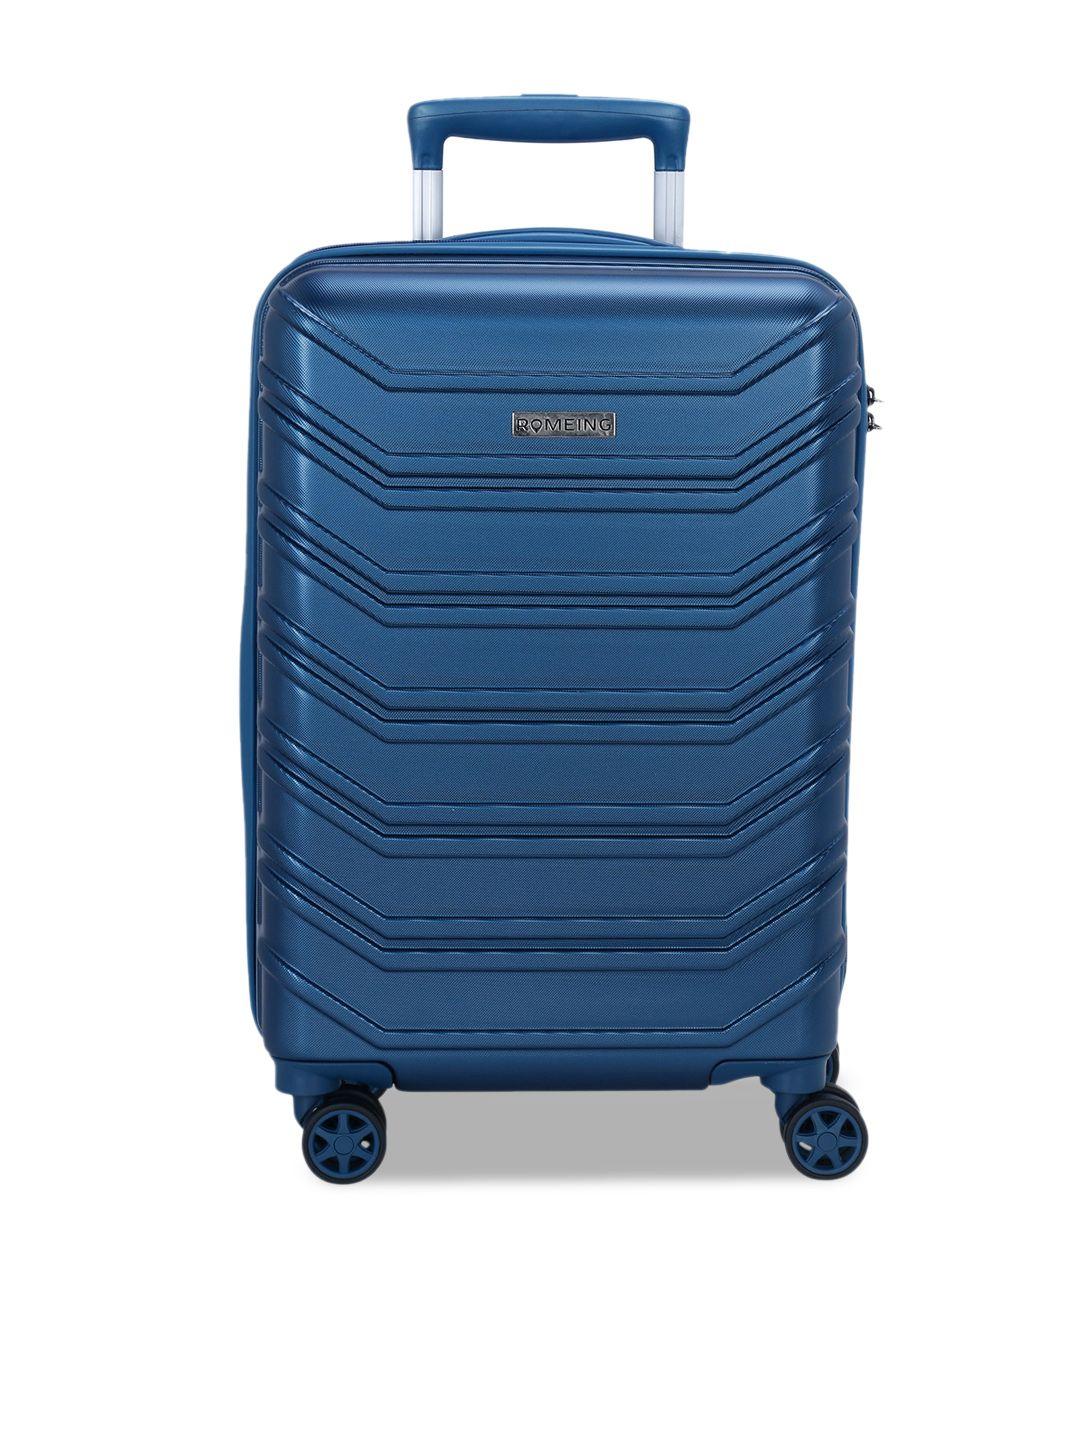 romeing monopoli navy blue textured hard-sided polycarbonate cabin trolley suitcase